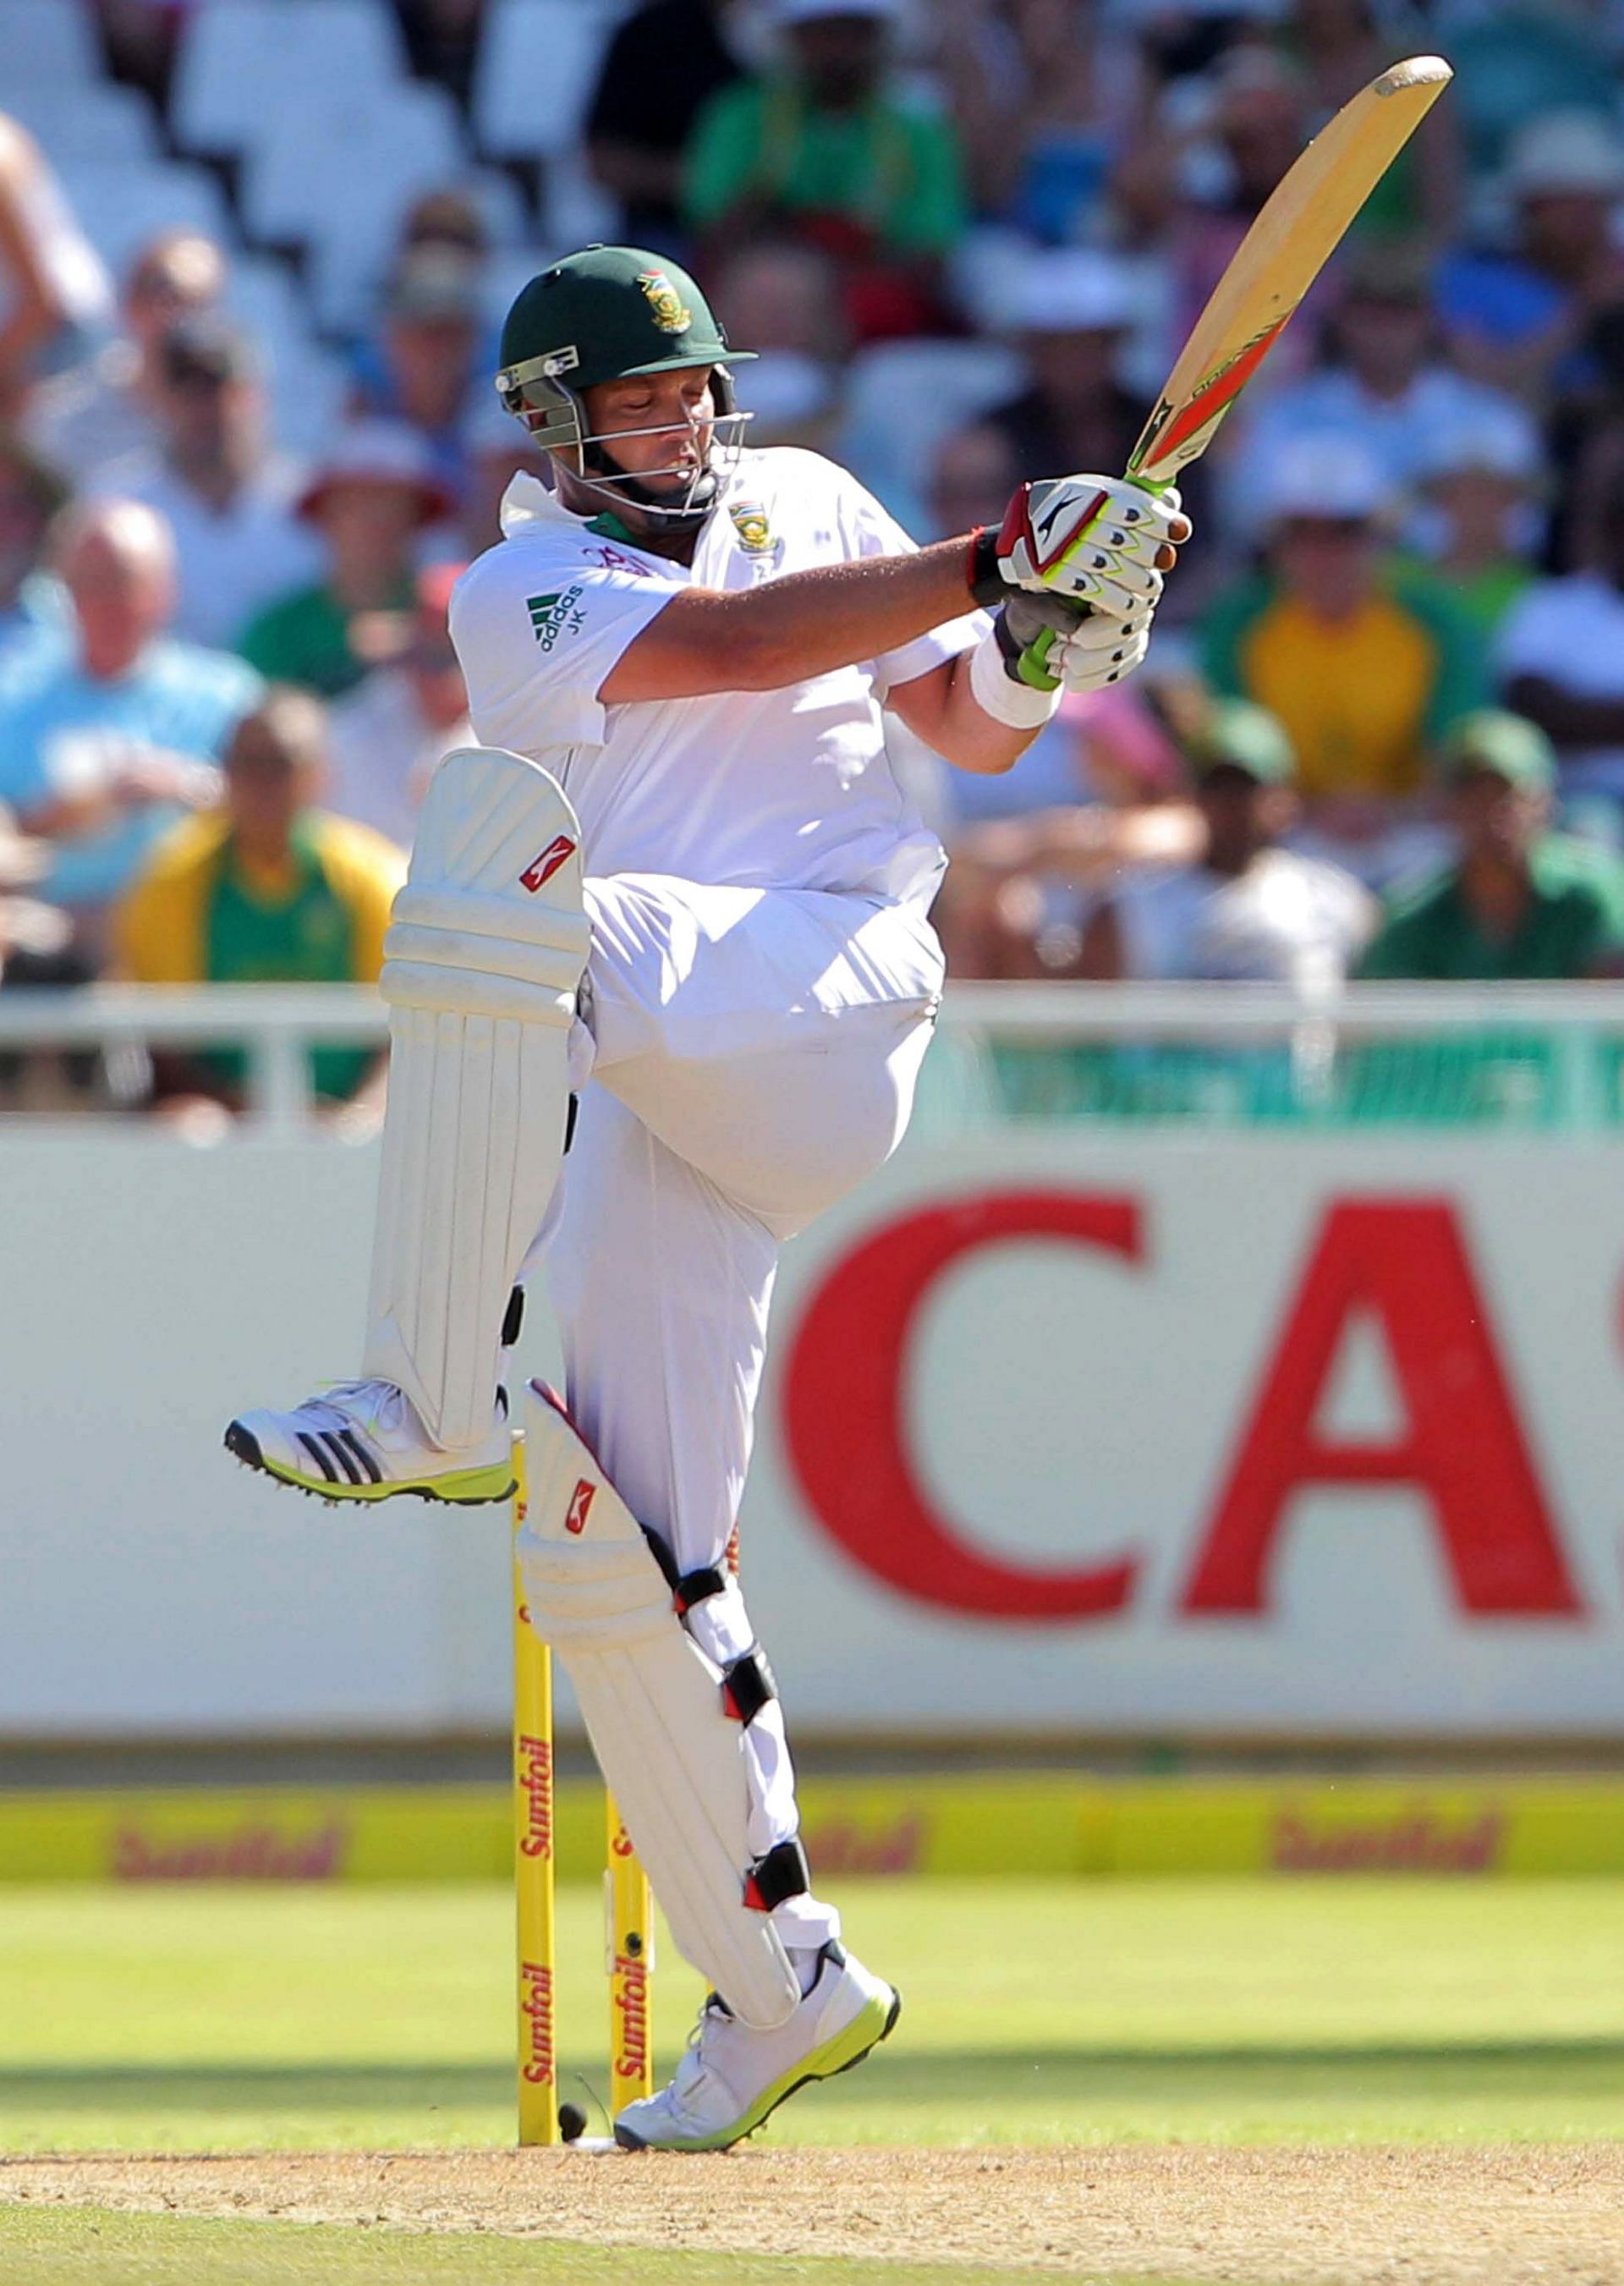 South Africa v New Zealand - First Test: Day 1